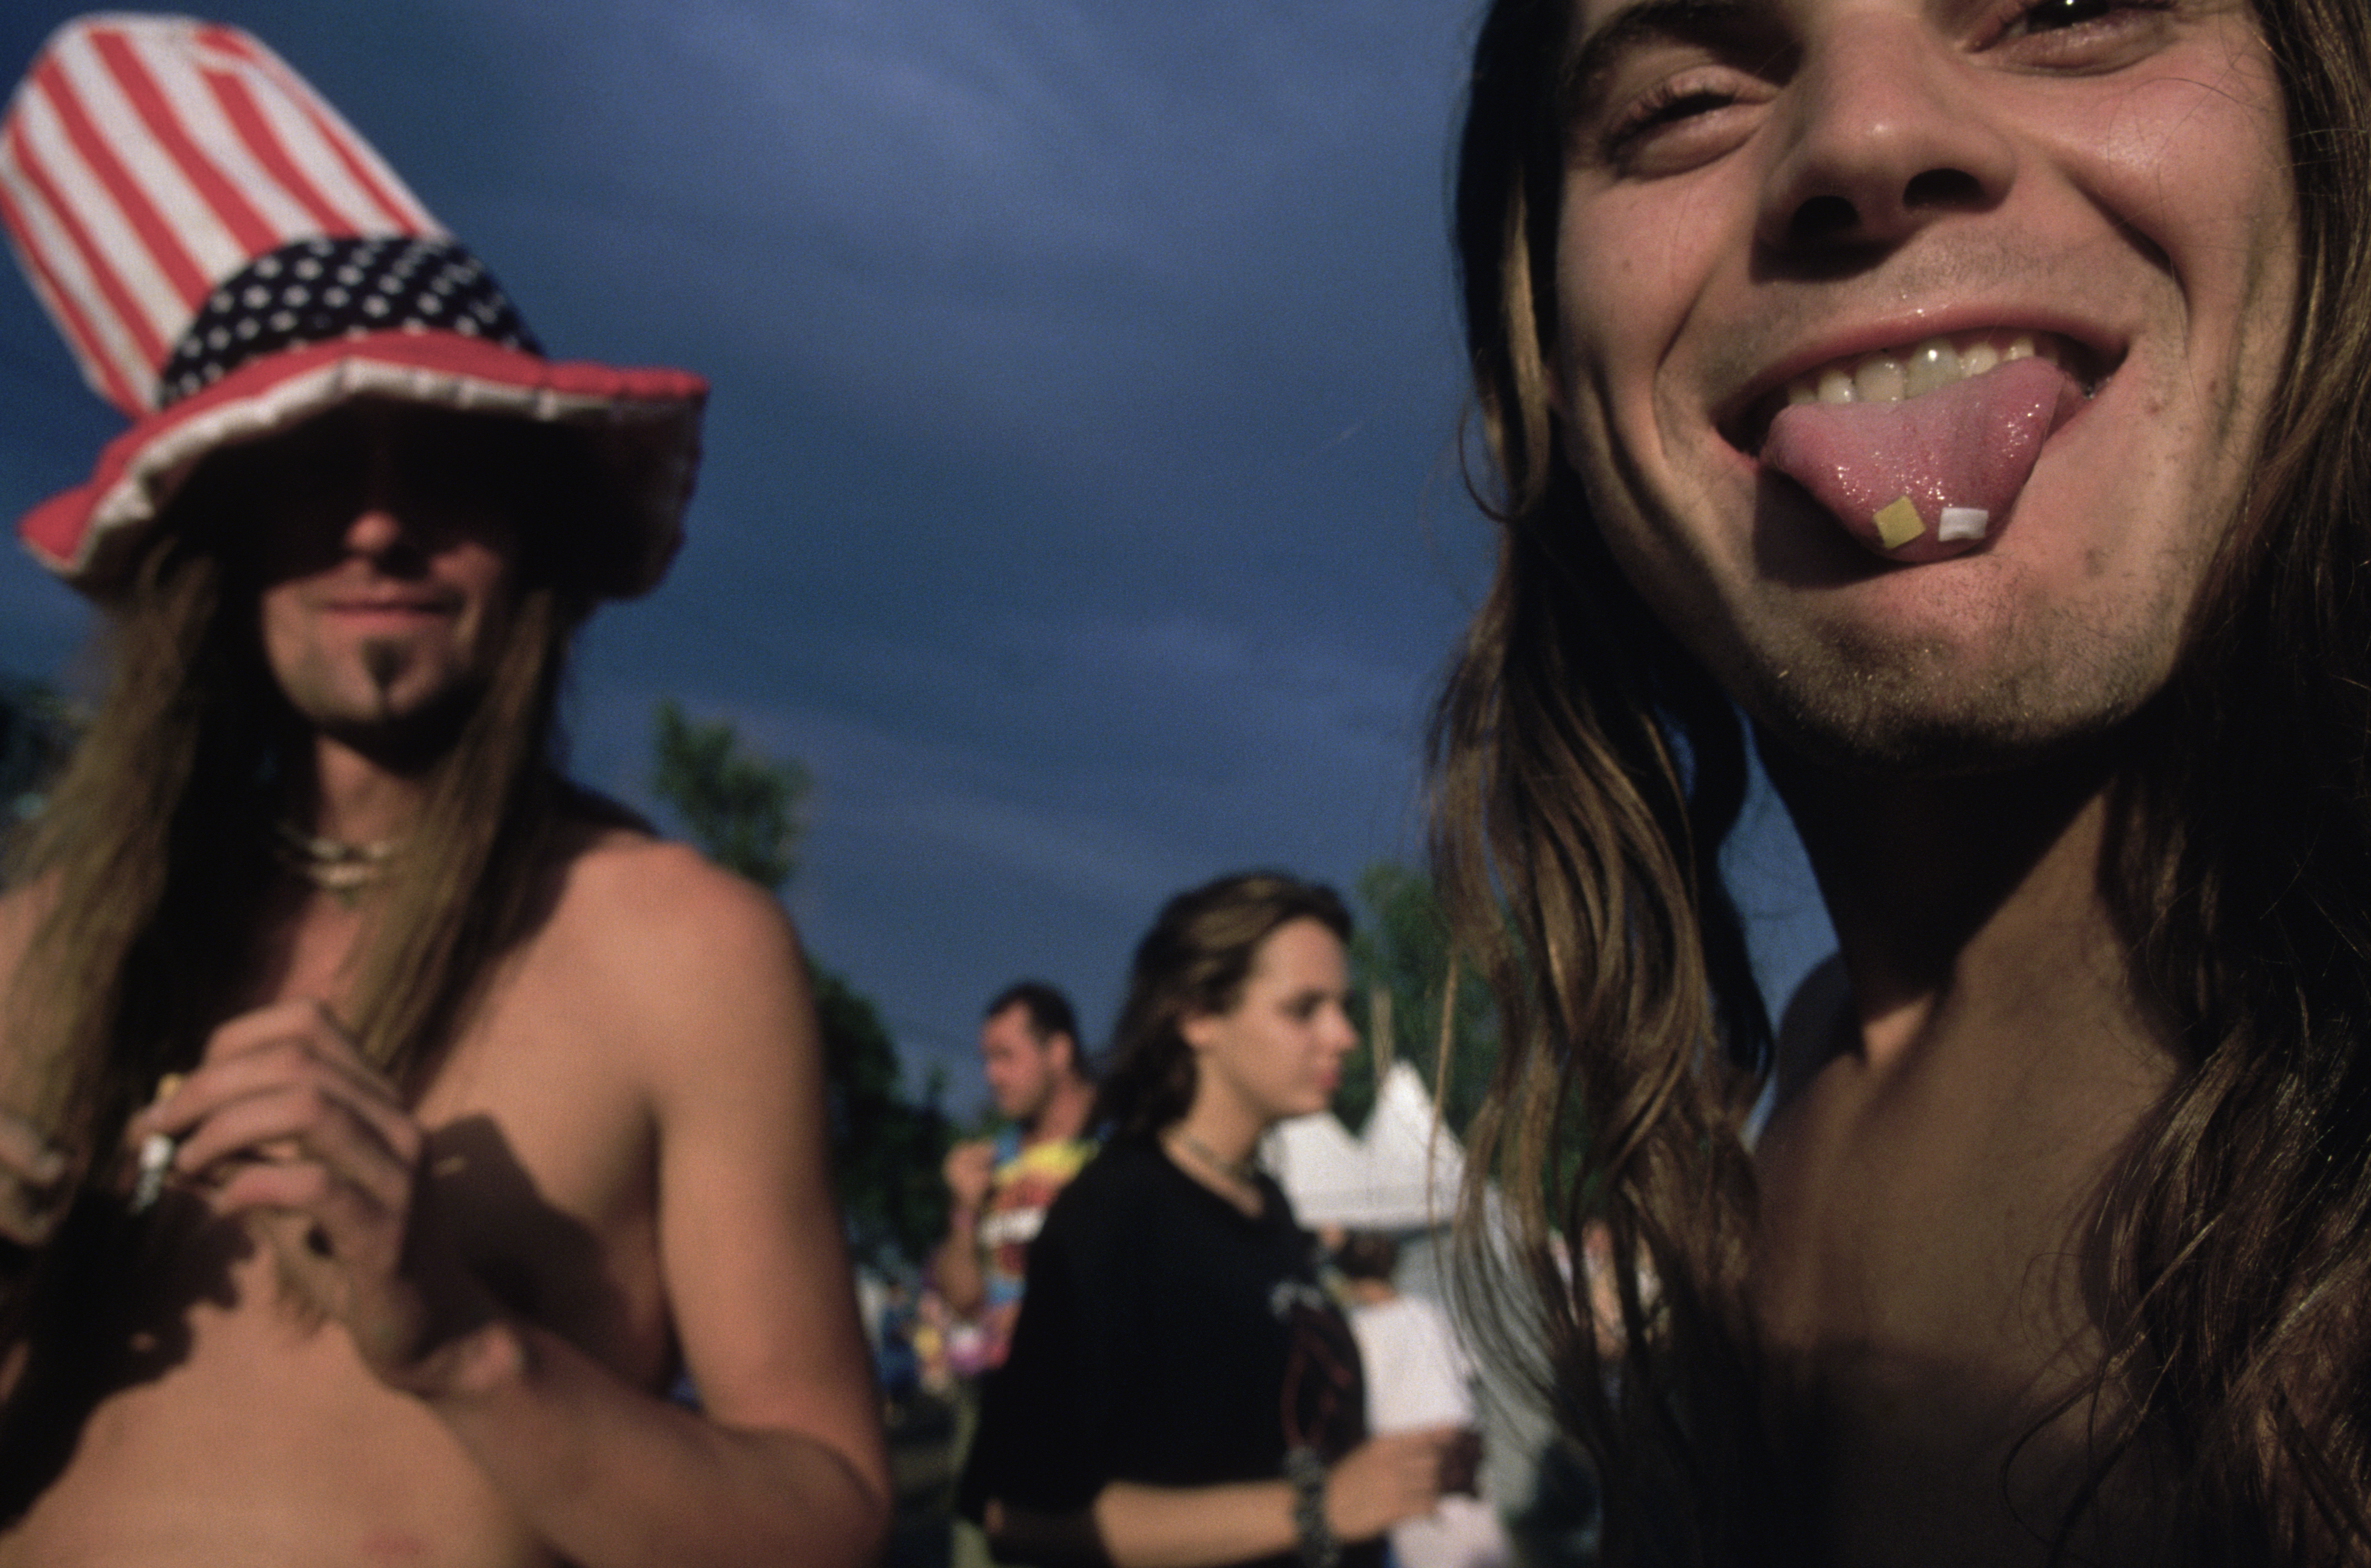 Saugerties, New York: Woodstock 94 - LSD tabs on tip of young man's tongue. (Photo by mark peterson/Corbis via Getty Images)